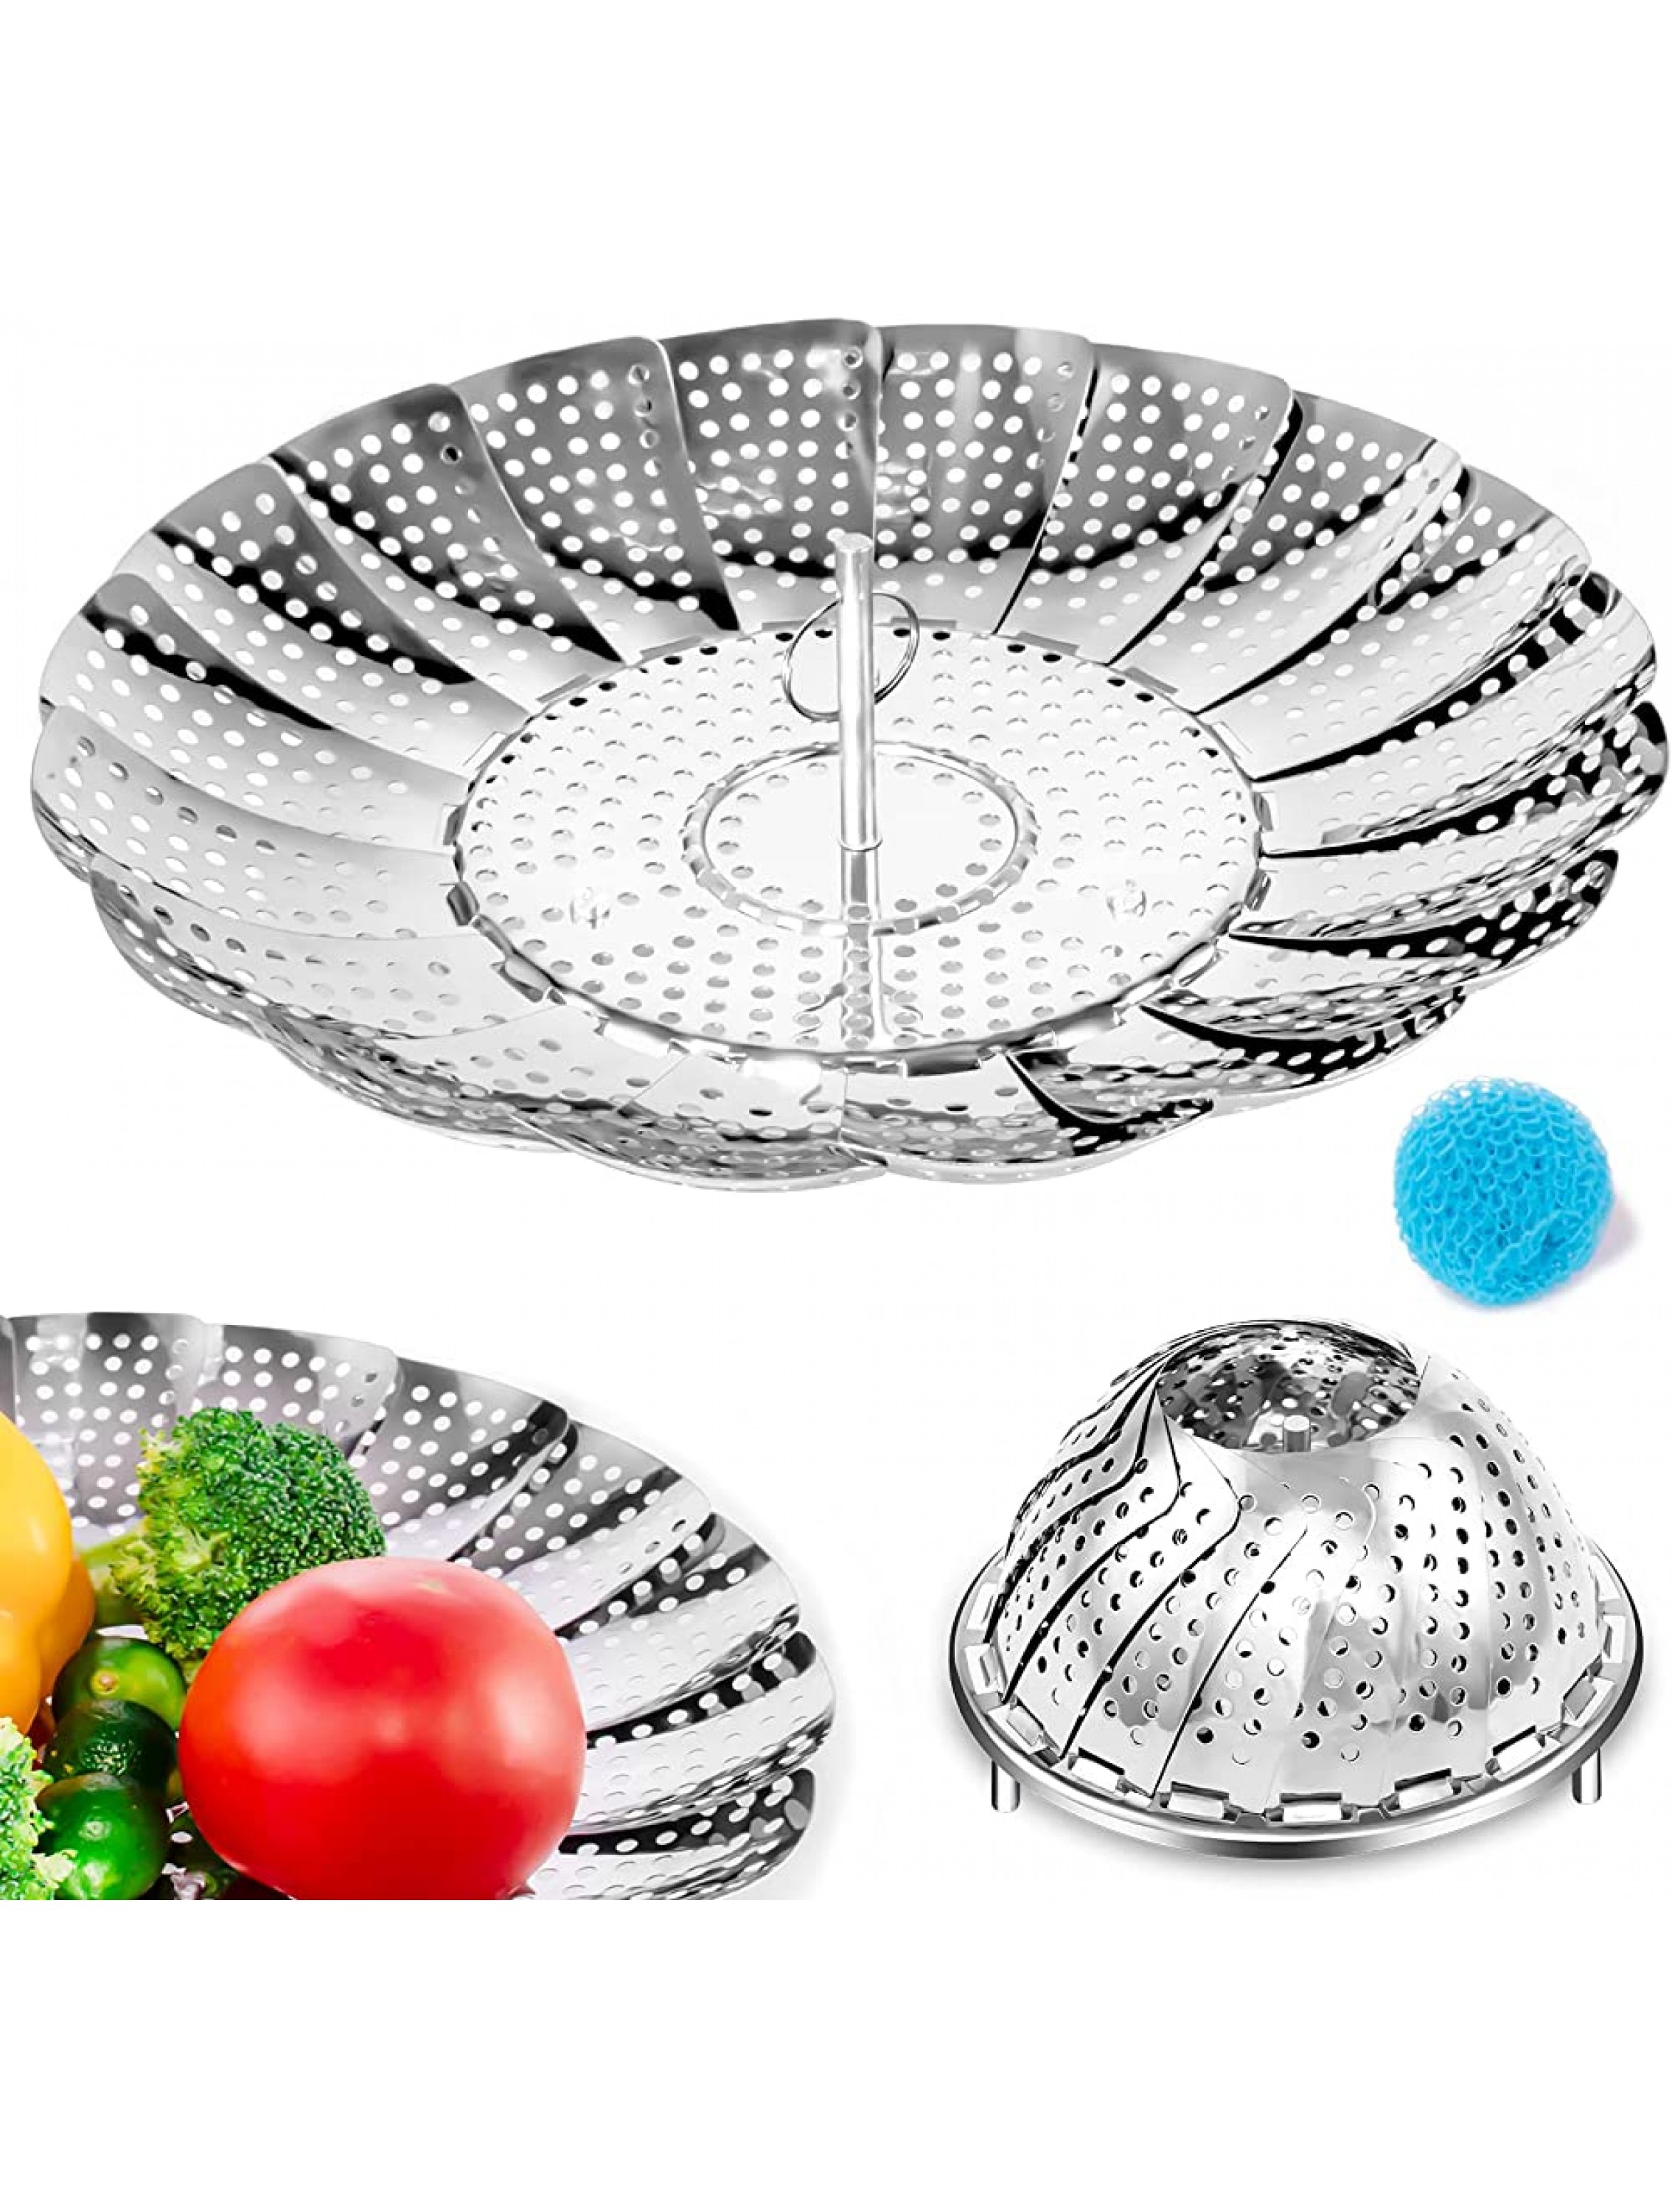 Vegetable Steamer Stainless Steel Steamer Basket for Cooking Seafood Vegetable and Food Folding Expandable Steamer for Cooking to Fits Various Size Pot Free Cleaning Ball Attached 6 to 11 - BK8S0UYYH